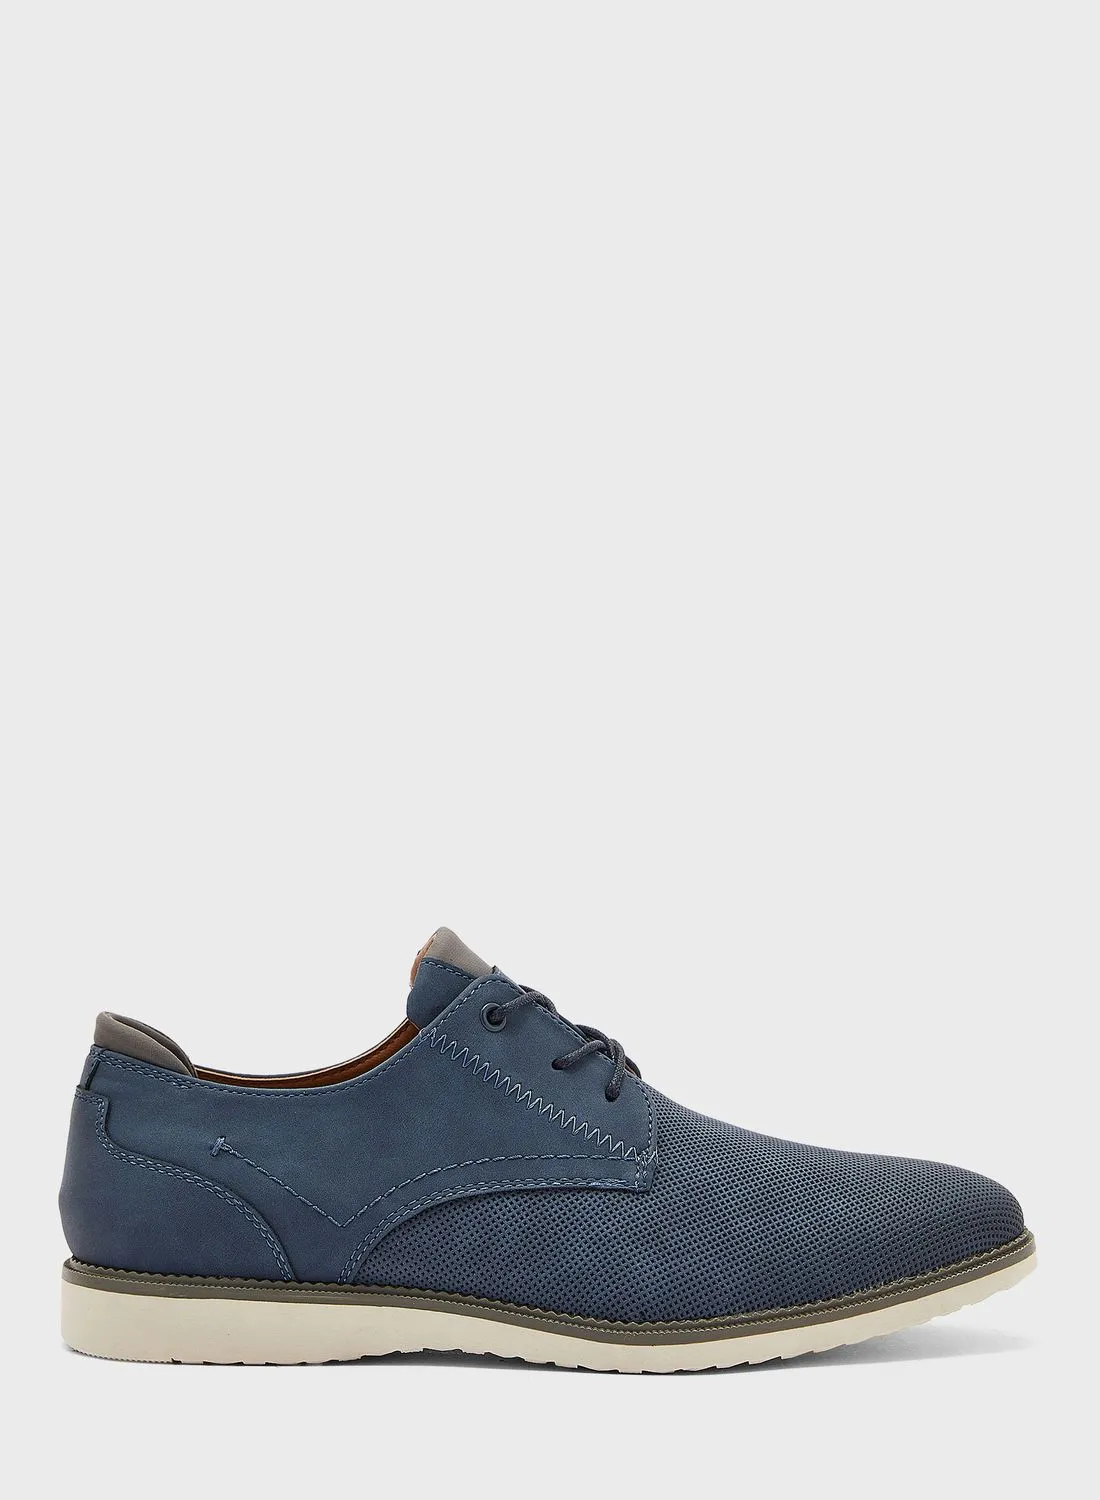 CALL IT SPRING Lace Ups Formal Shoes